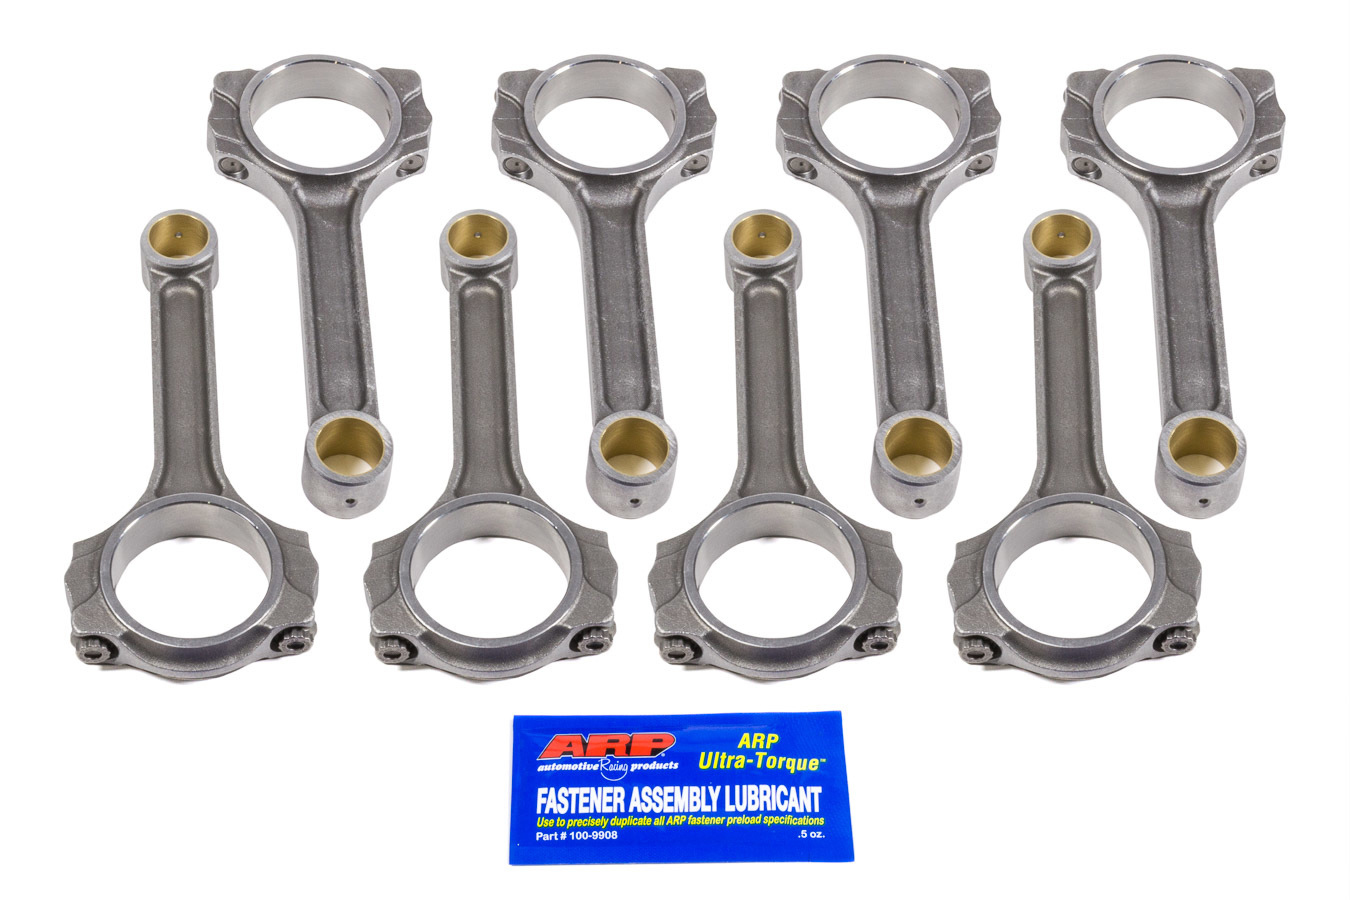 Scat 2-ICR6000-7/16A - Connecting Rod, Pro Sport, I Beam, 6.000 in Long, Bushed, 7/16 in Cap Screws, ARP2000, Forged Steel, Small Block Chevy, Set of 8